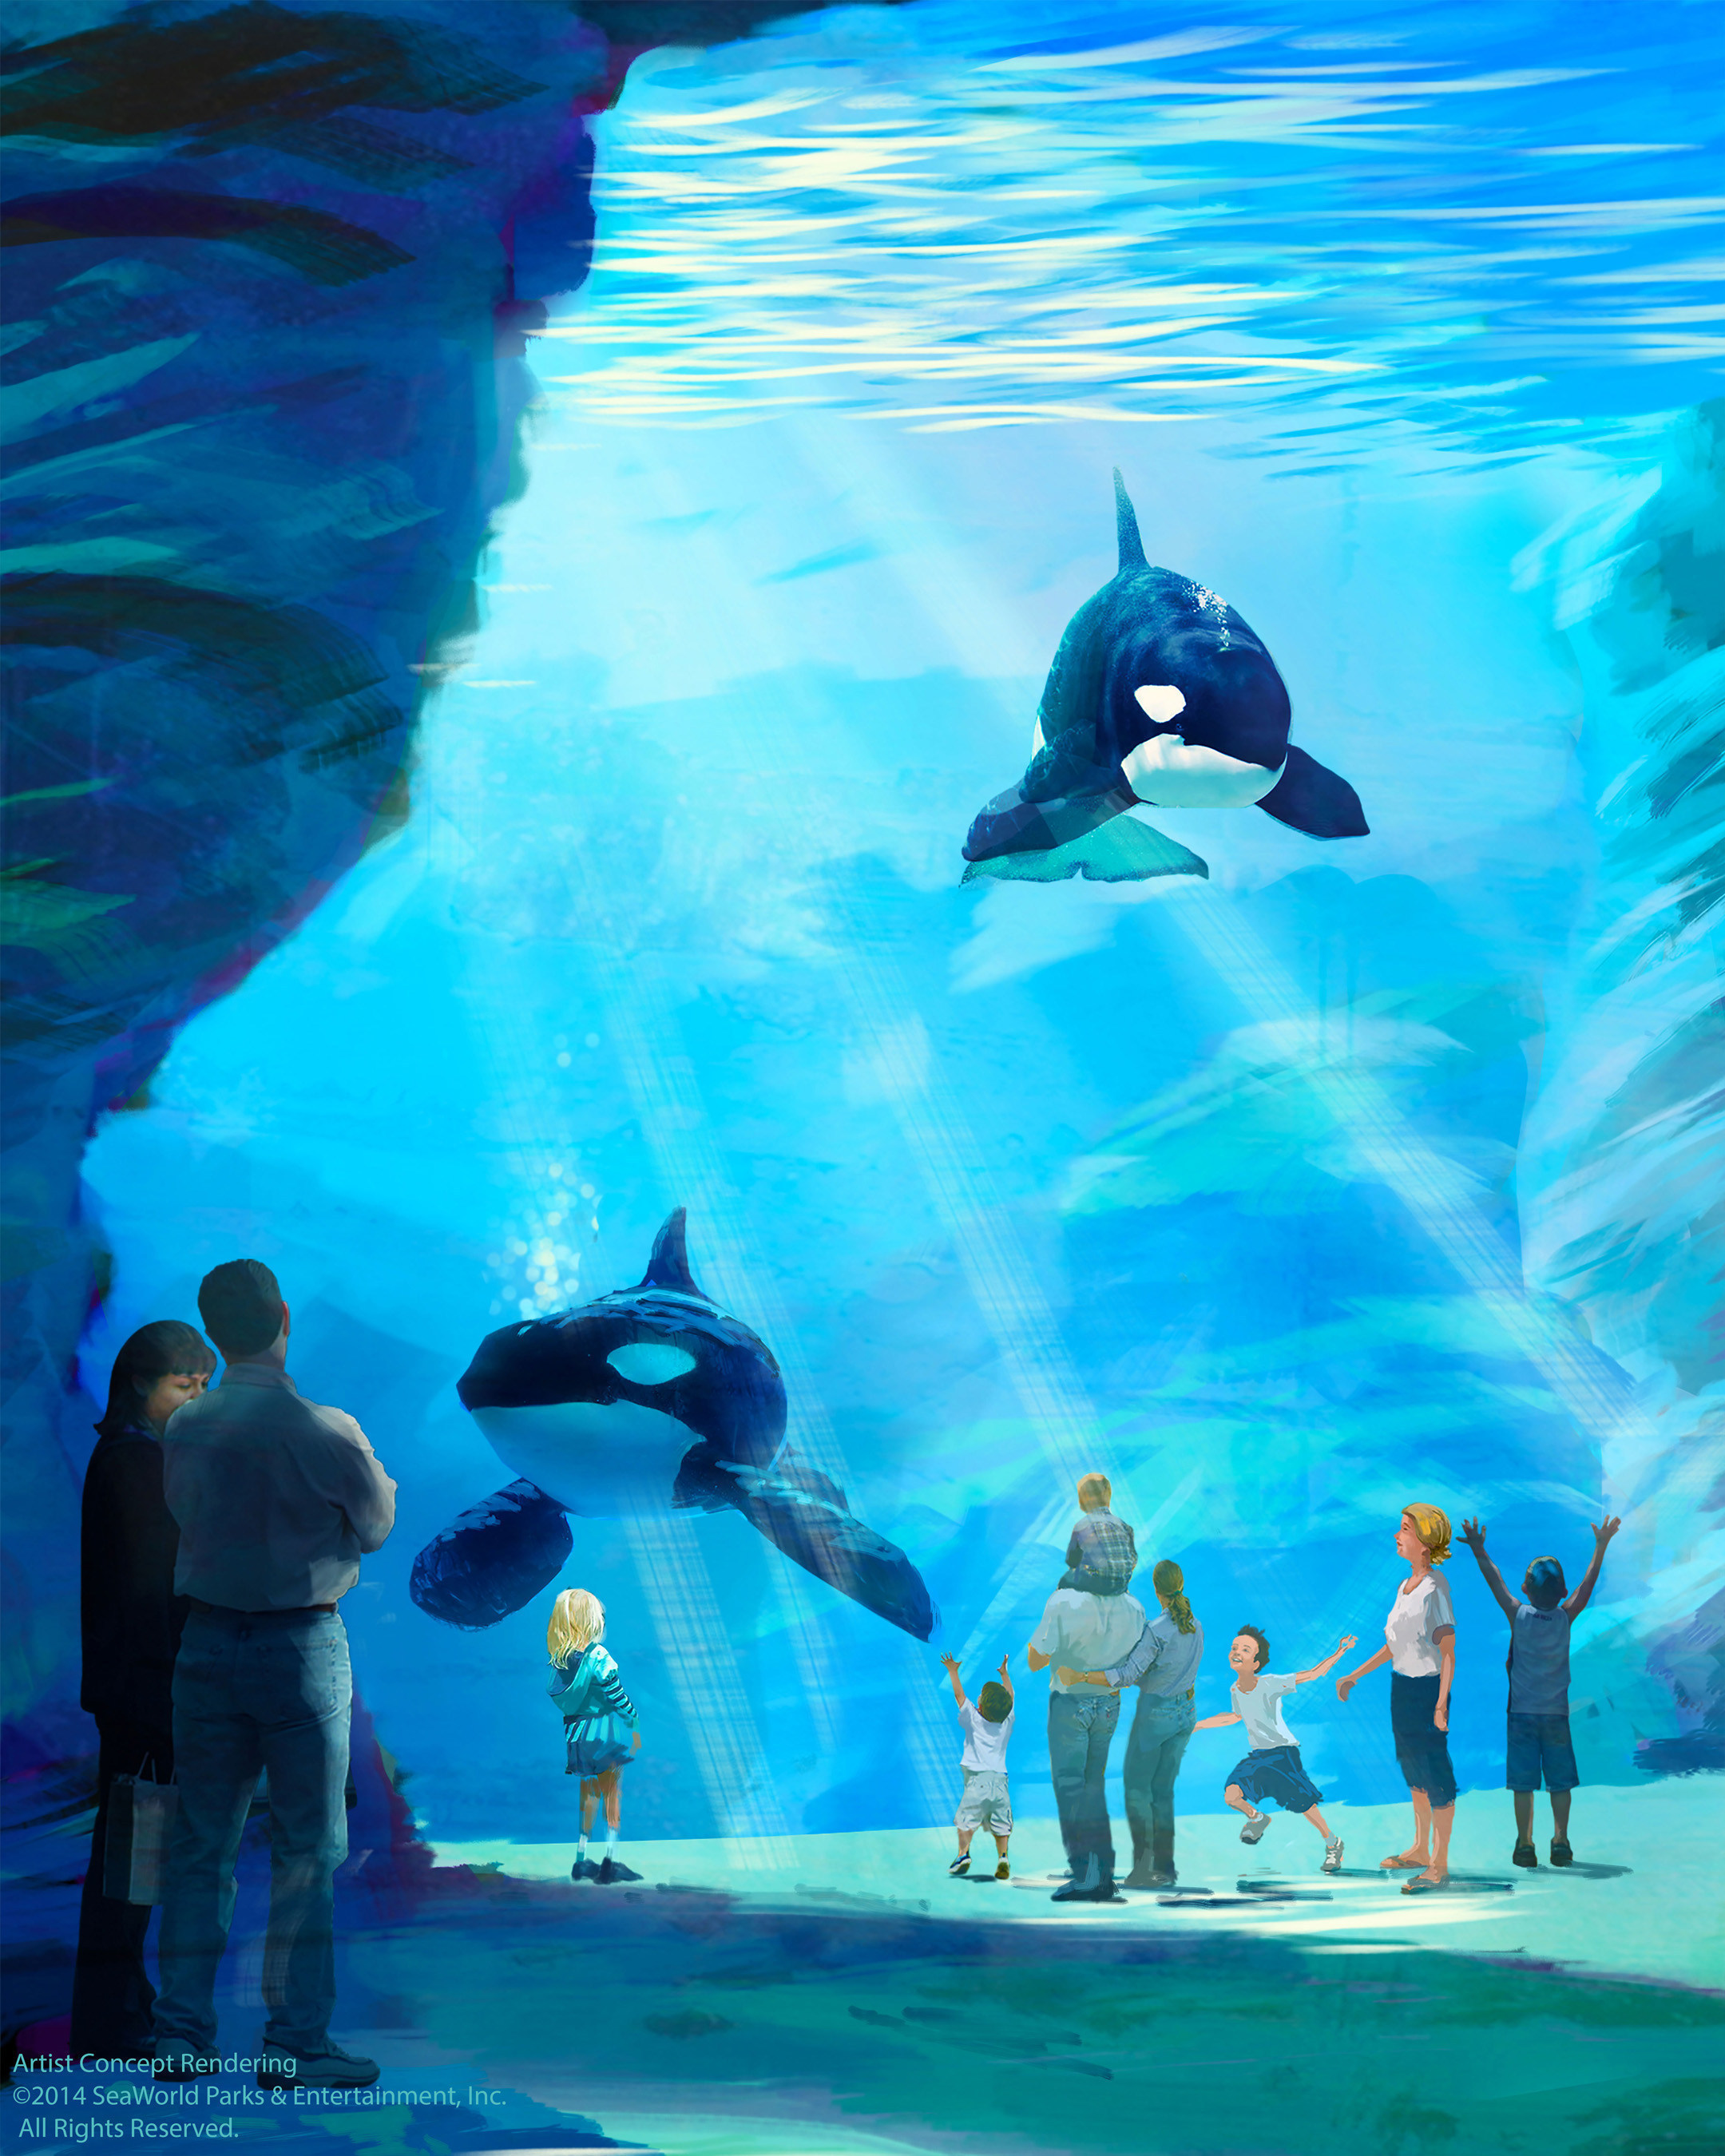 SeaWorld's new killer whale environment will feature an underwater viewing gallery that is 40 feet high. Depth of the new habitat will be 50 feet. (PRNewsFoto/SeaWorld Entertainment, Inc.)